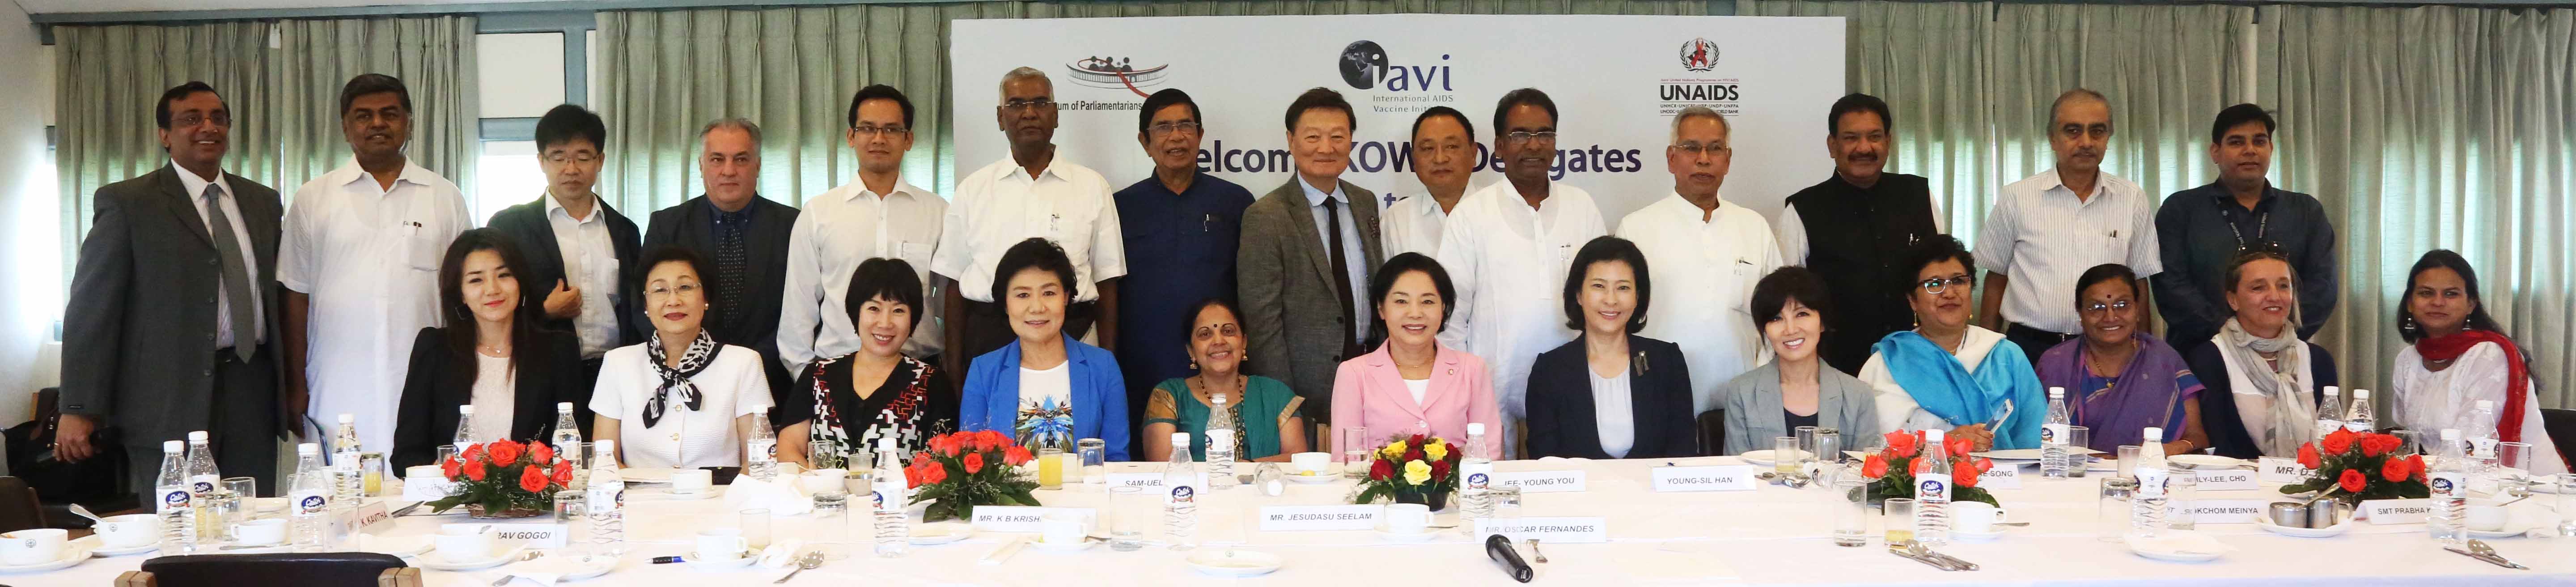 Members of Korean Women against AIDS (KOWA) met with senior government officials and scientists on their first official visit to India coordinated by IAVI and UNAIDS.